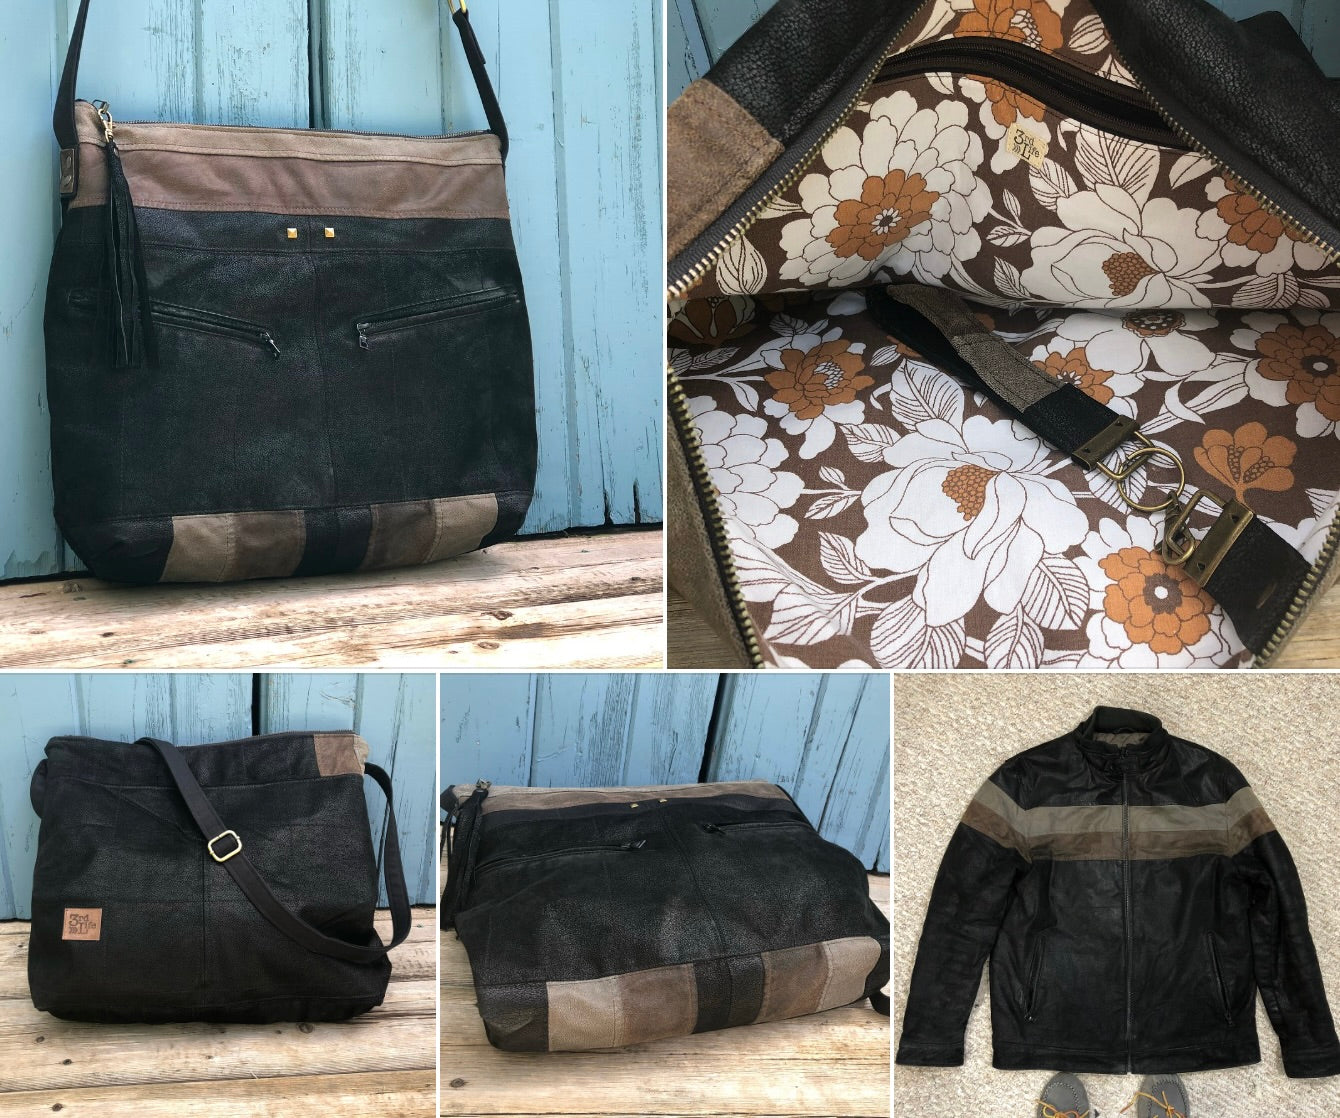 Custom Leather Jacket Bag - Made from your own jacket